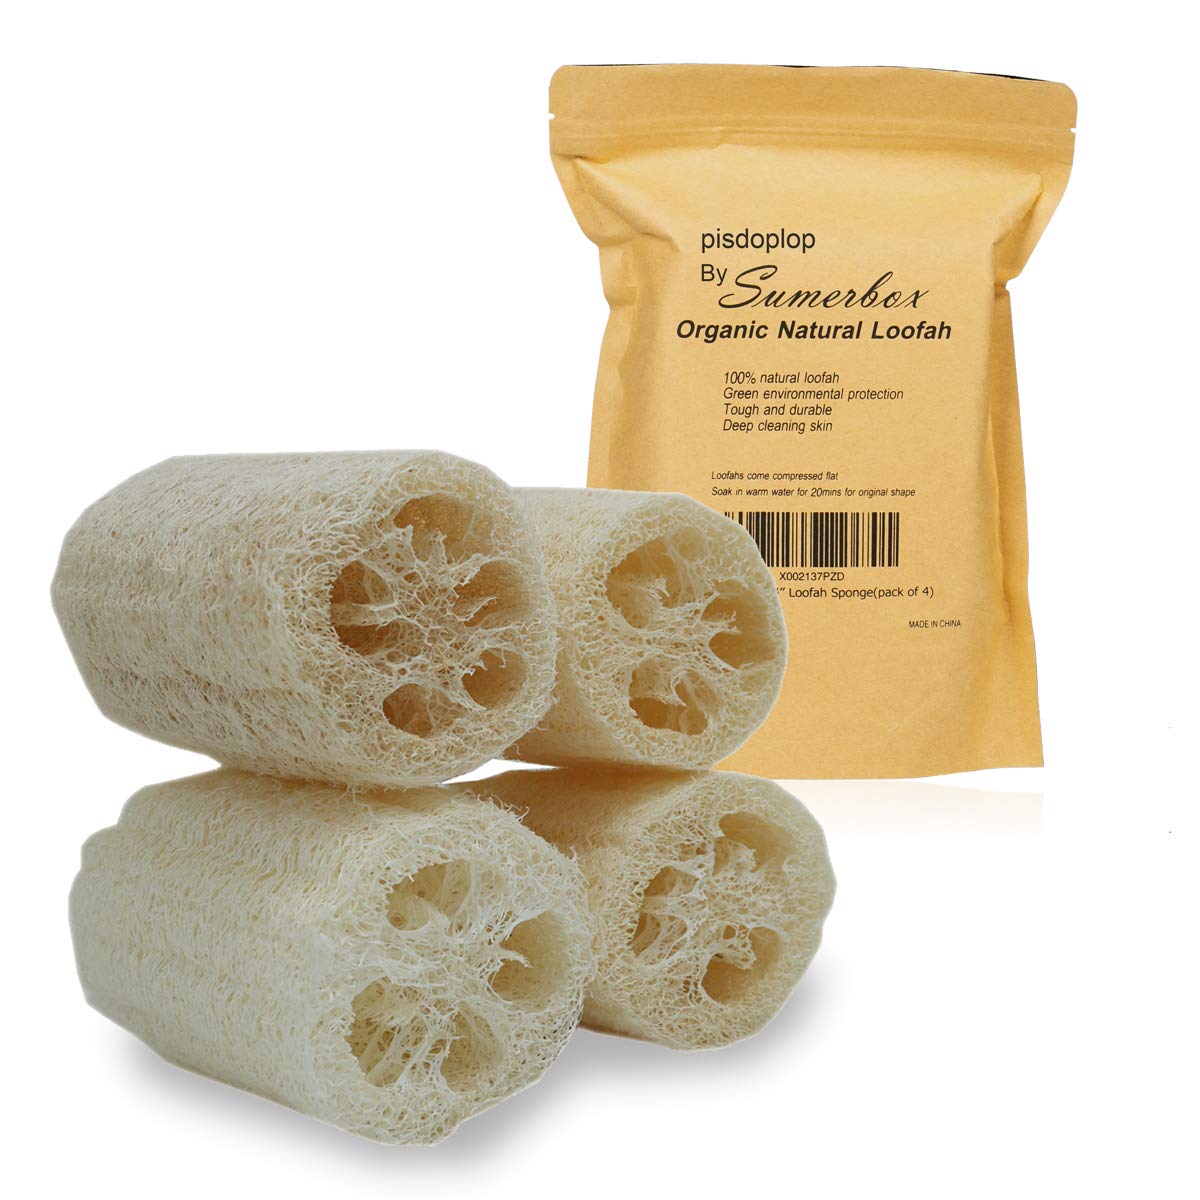 4 People Who Care Loofah Natural Sponge, 1 PC